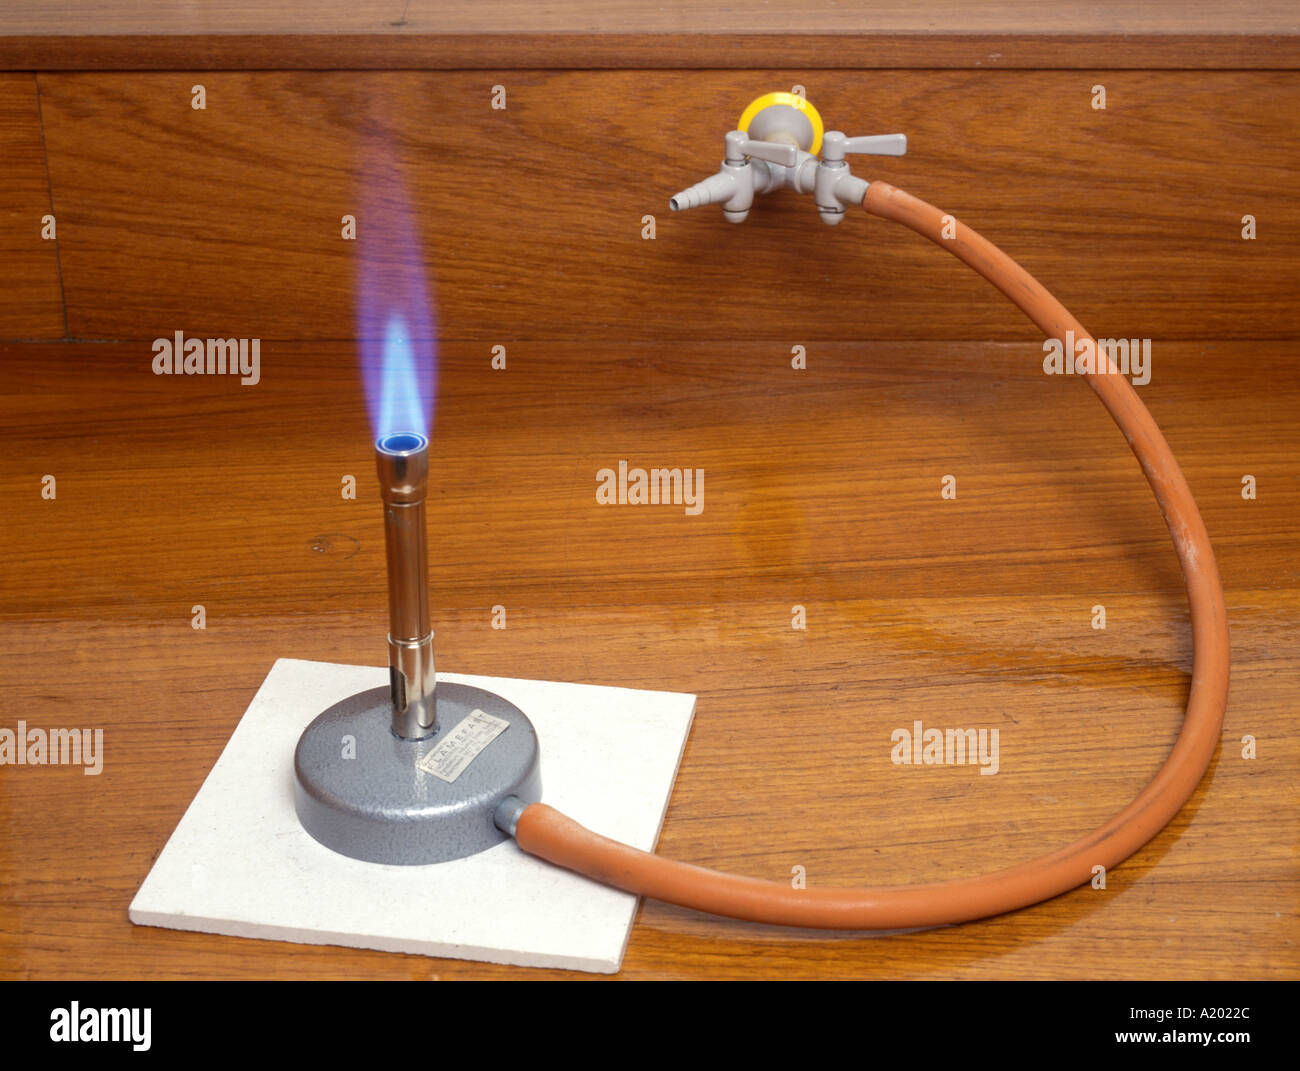 bunsen burner with a roaring blue flame when the air hole is open Stock Photo